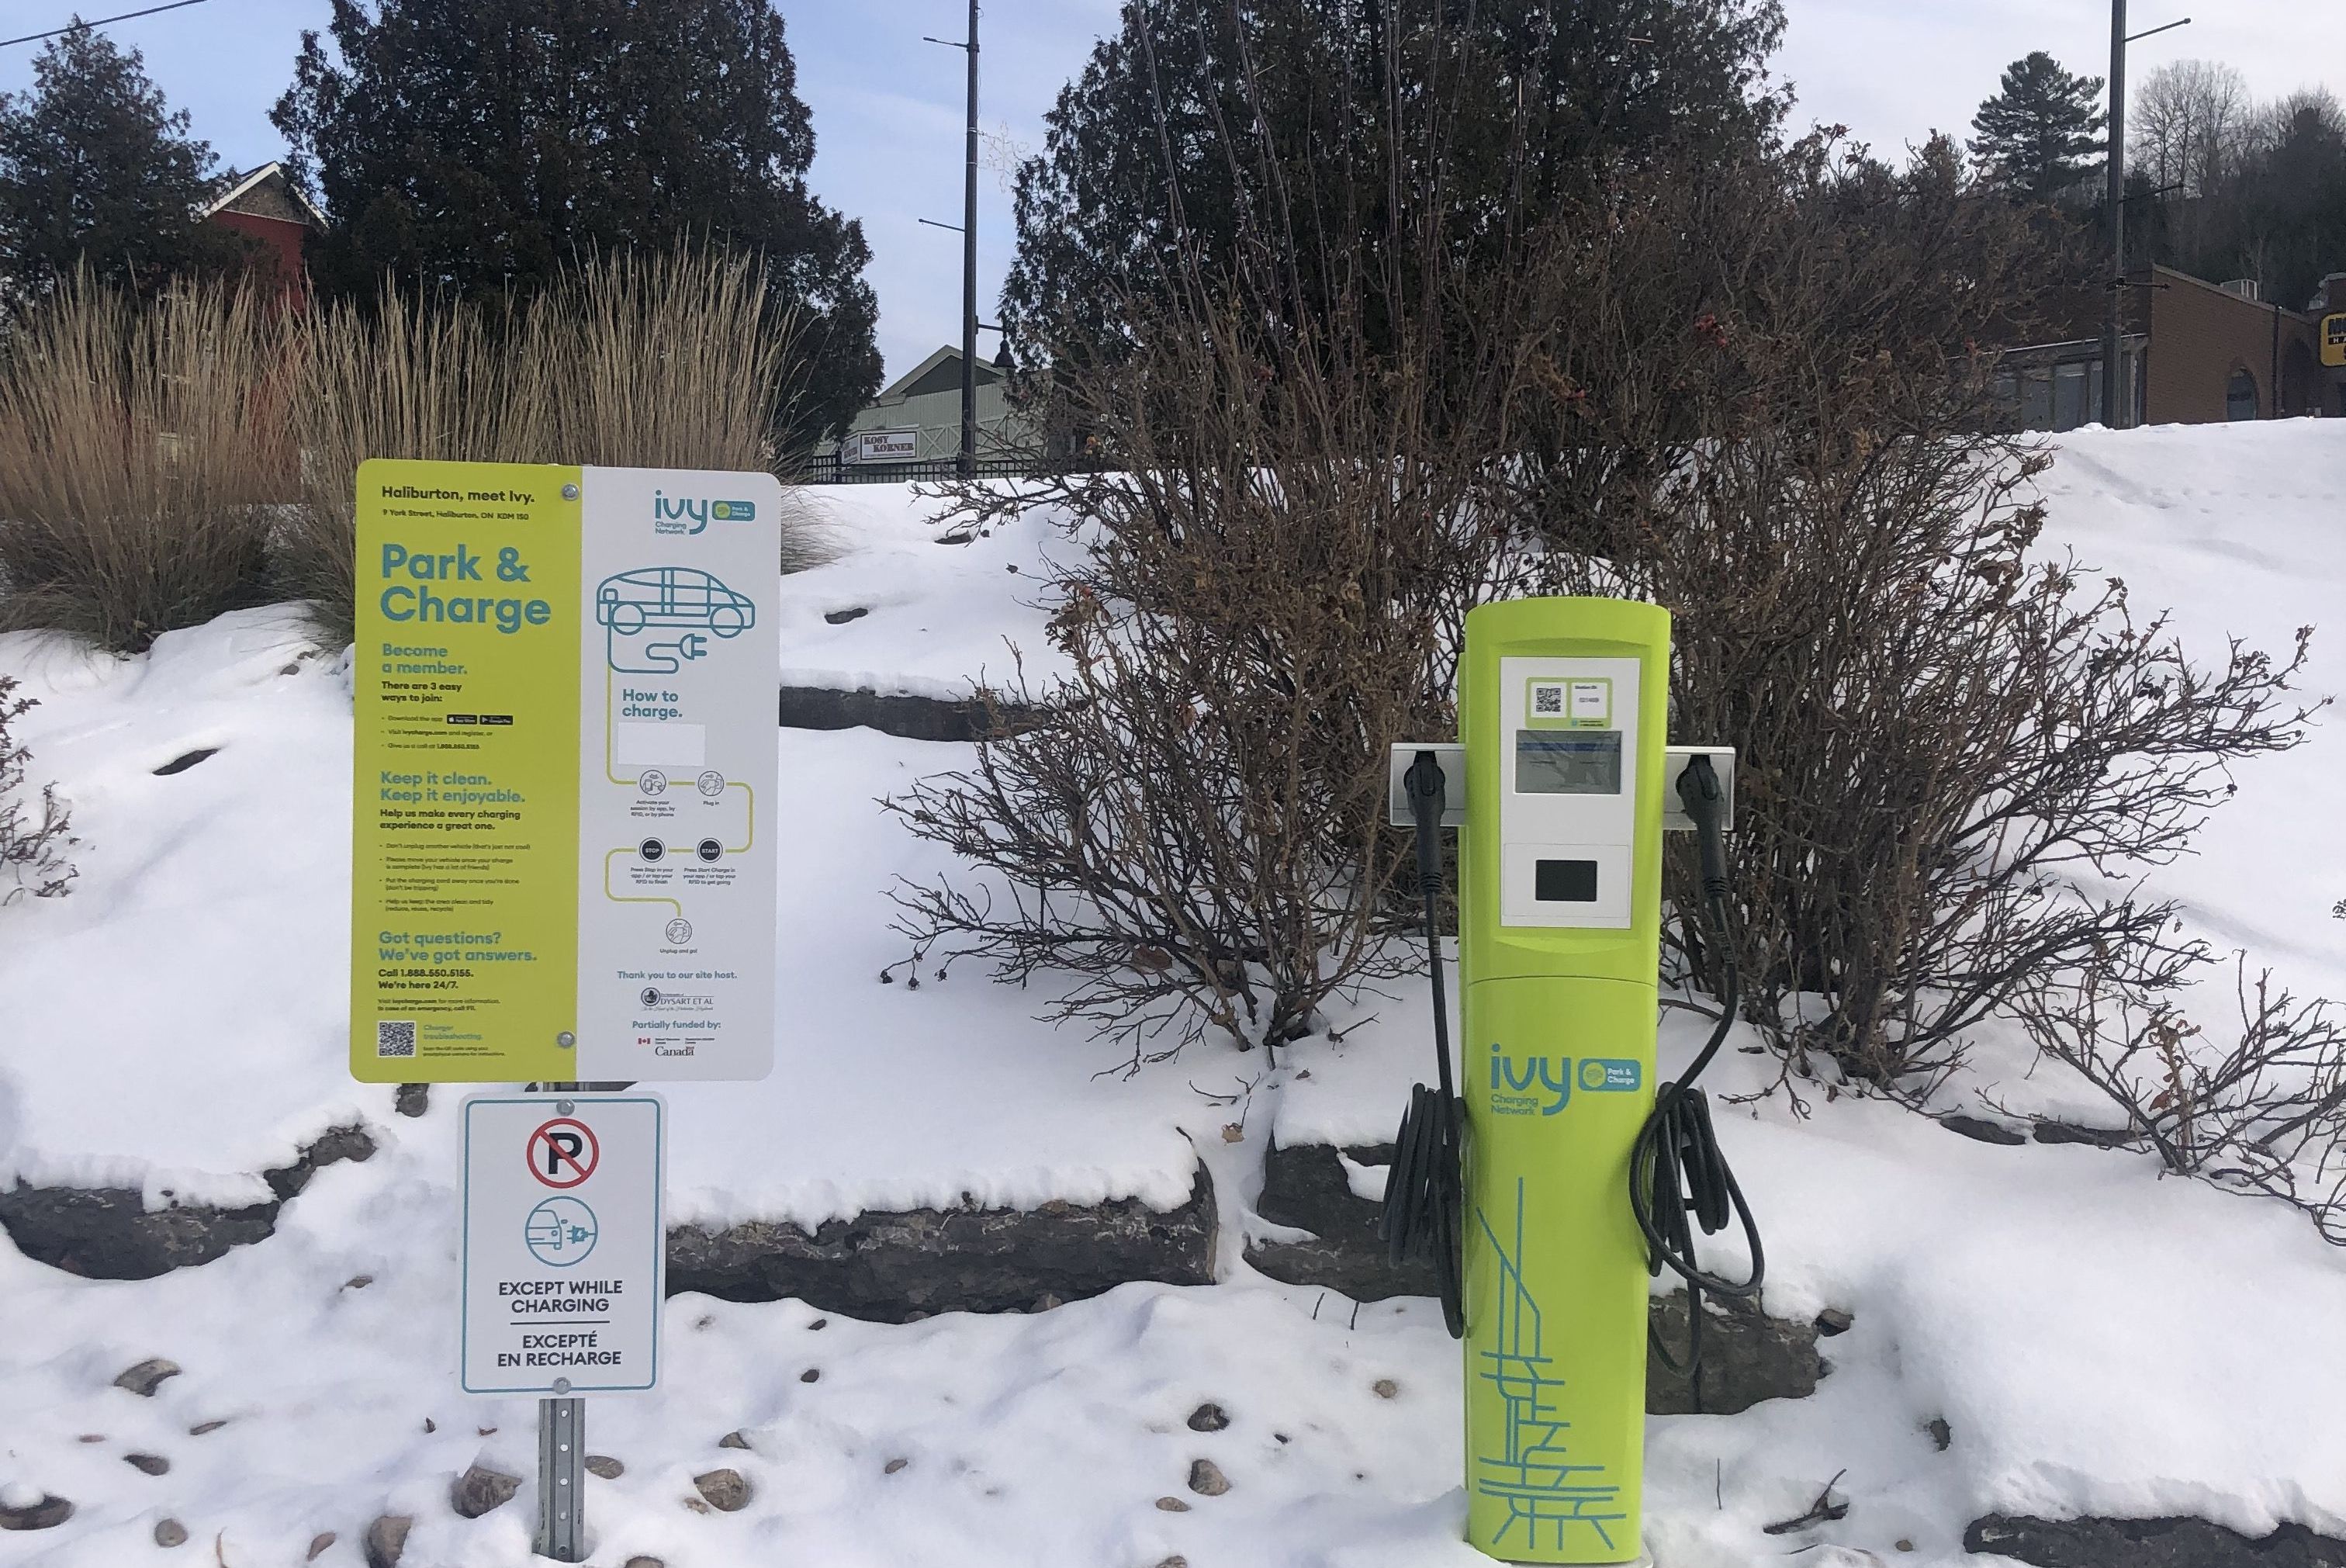 Image of the electric vehicle charging station in Haliburton